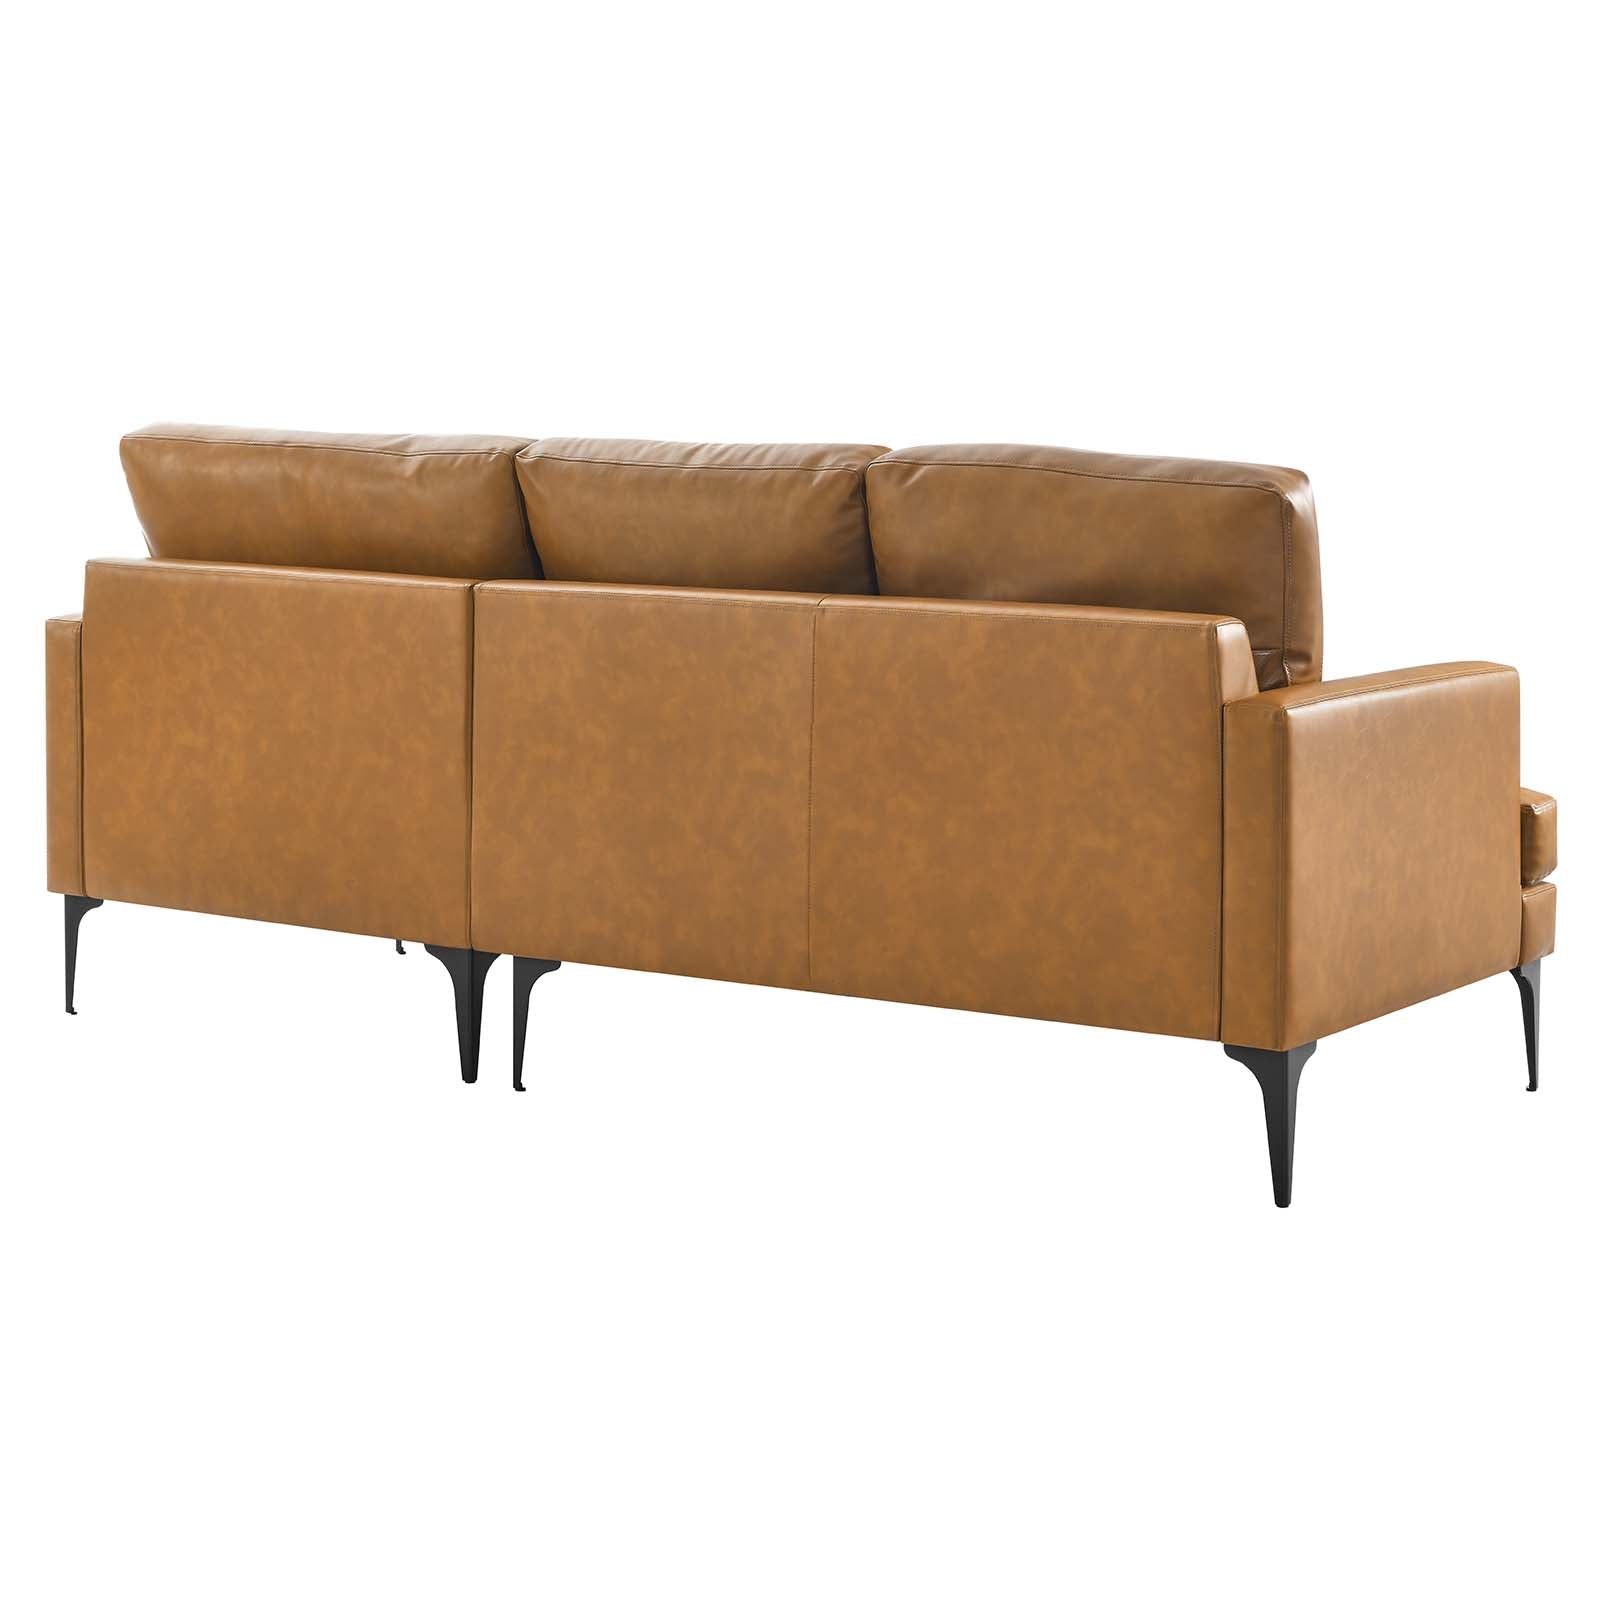 Evermore Right-Facing Vegan Leather Sectional Sofa - East Shore Modern Home Furnishings